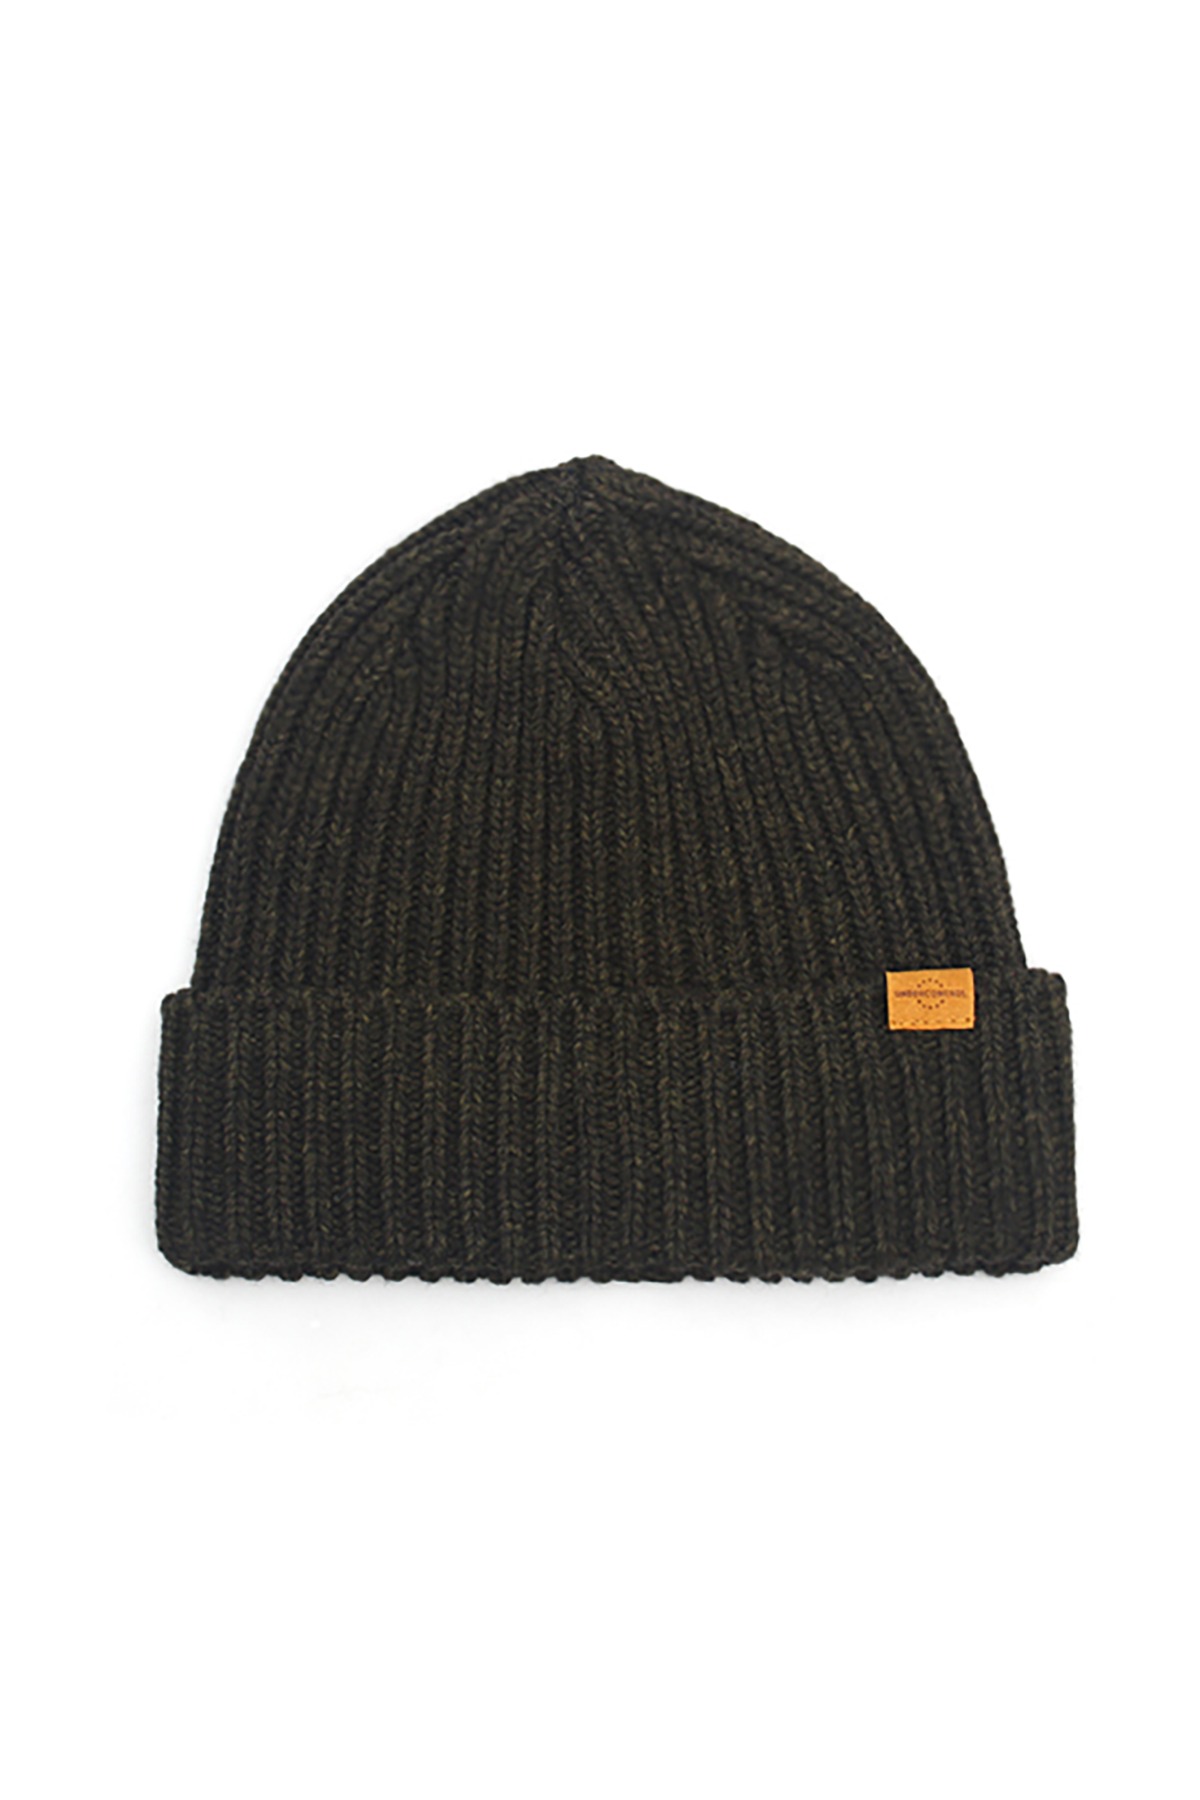 BEANIE / JUST FIT / WOOL / HEATHER OLIVE (BOX PACKAGE)